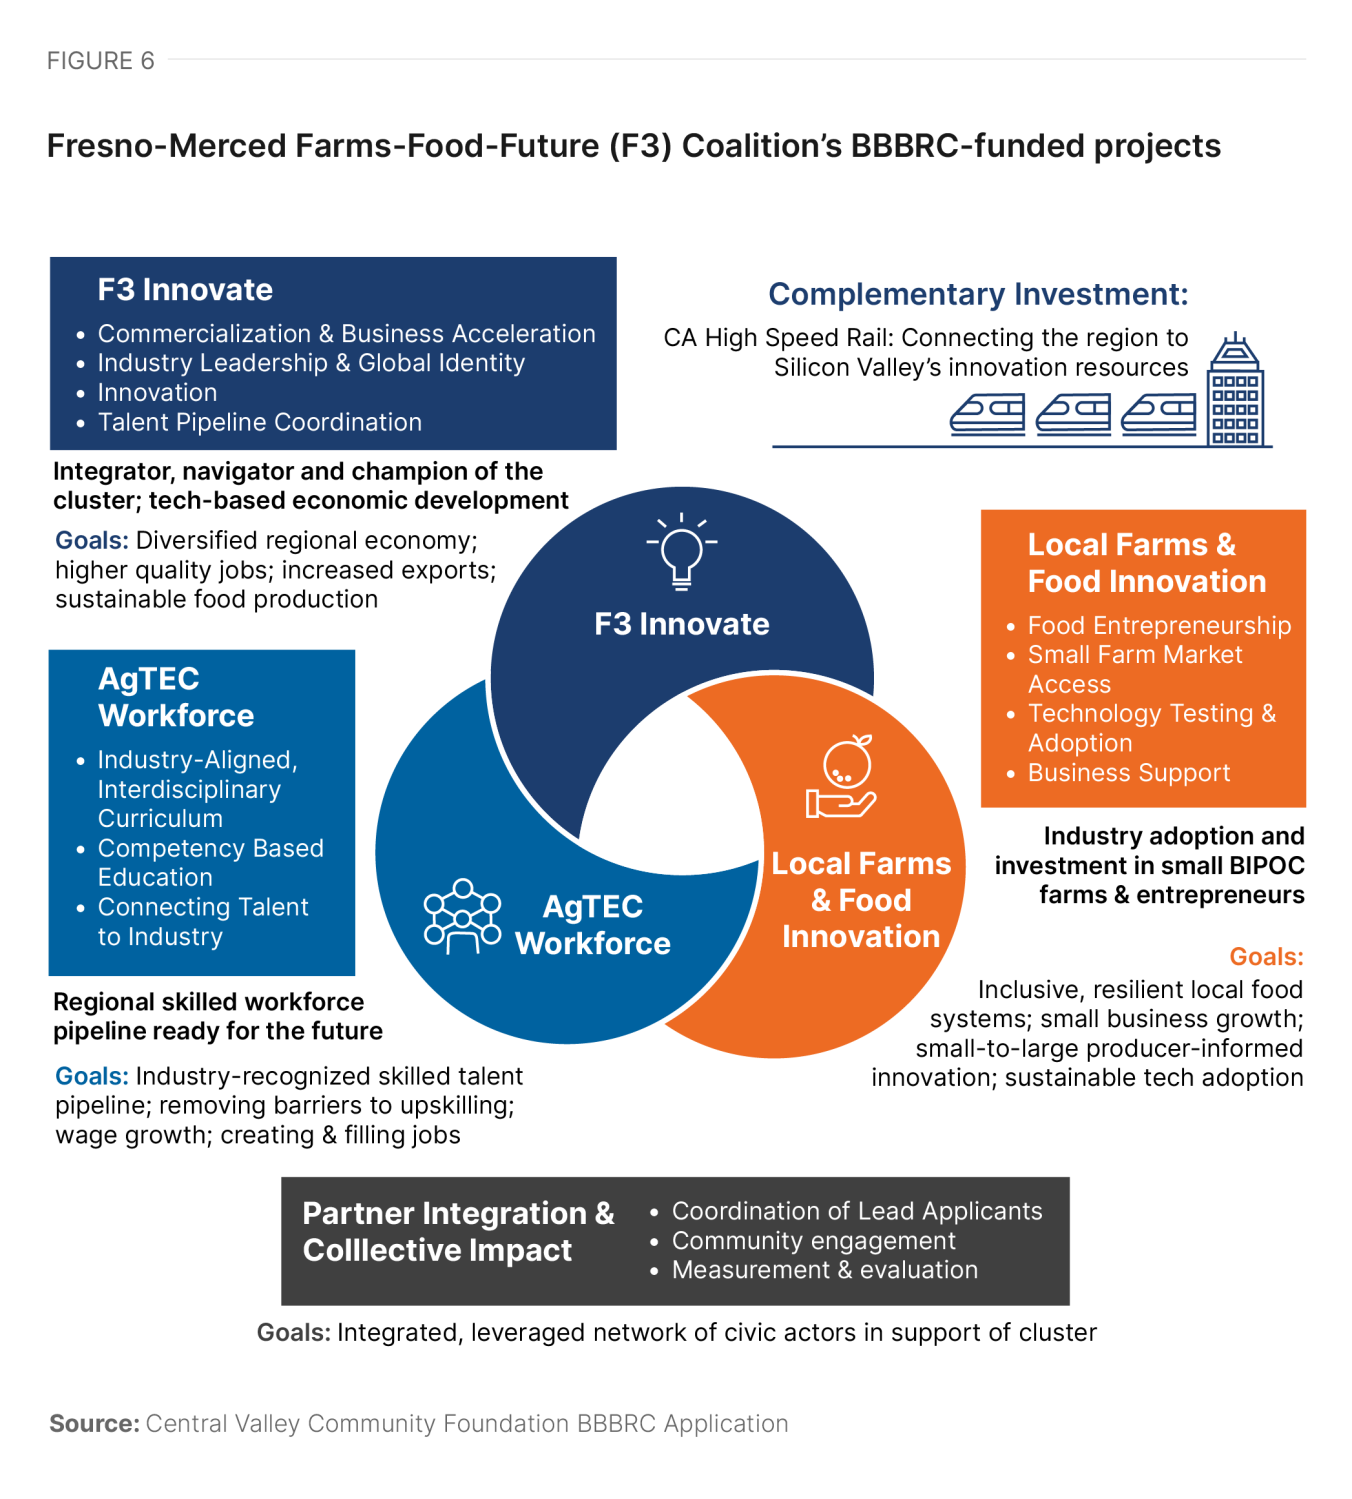 Figure 6. Fresno-Merced Farms-Food-Future (F3) Coalition’s BBBRC-funded projects